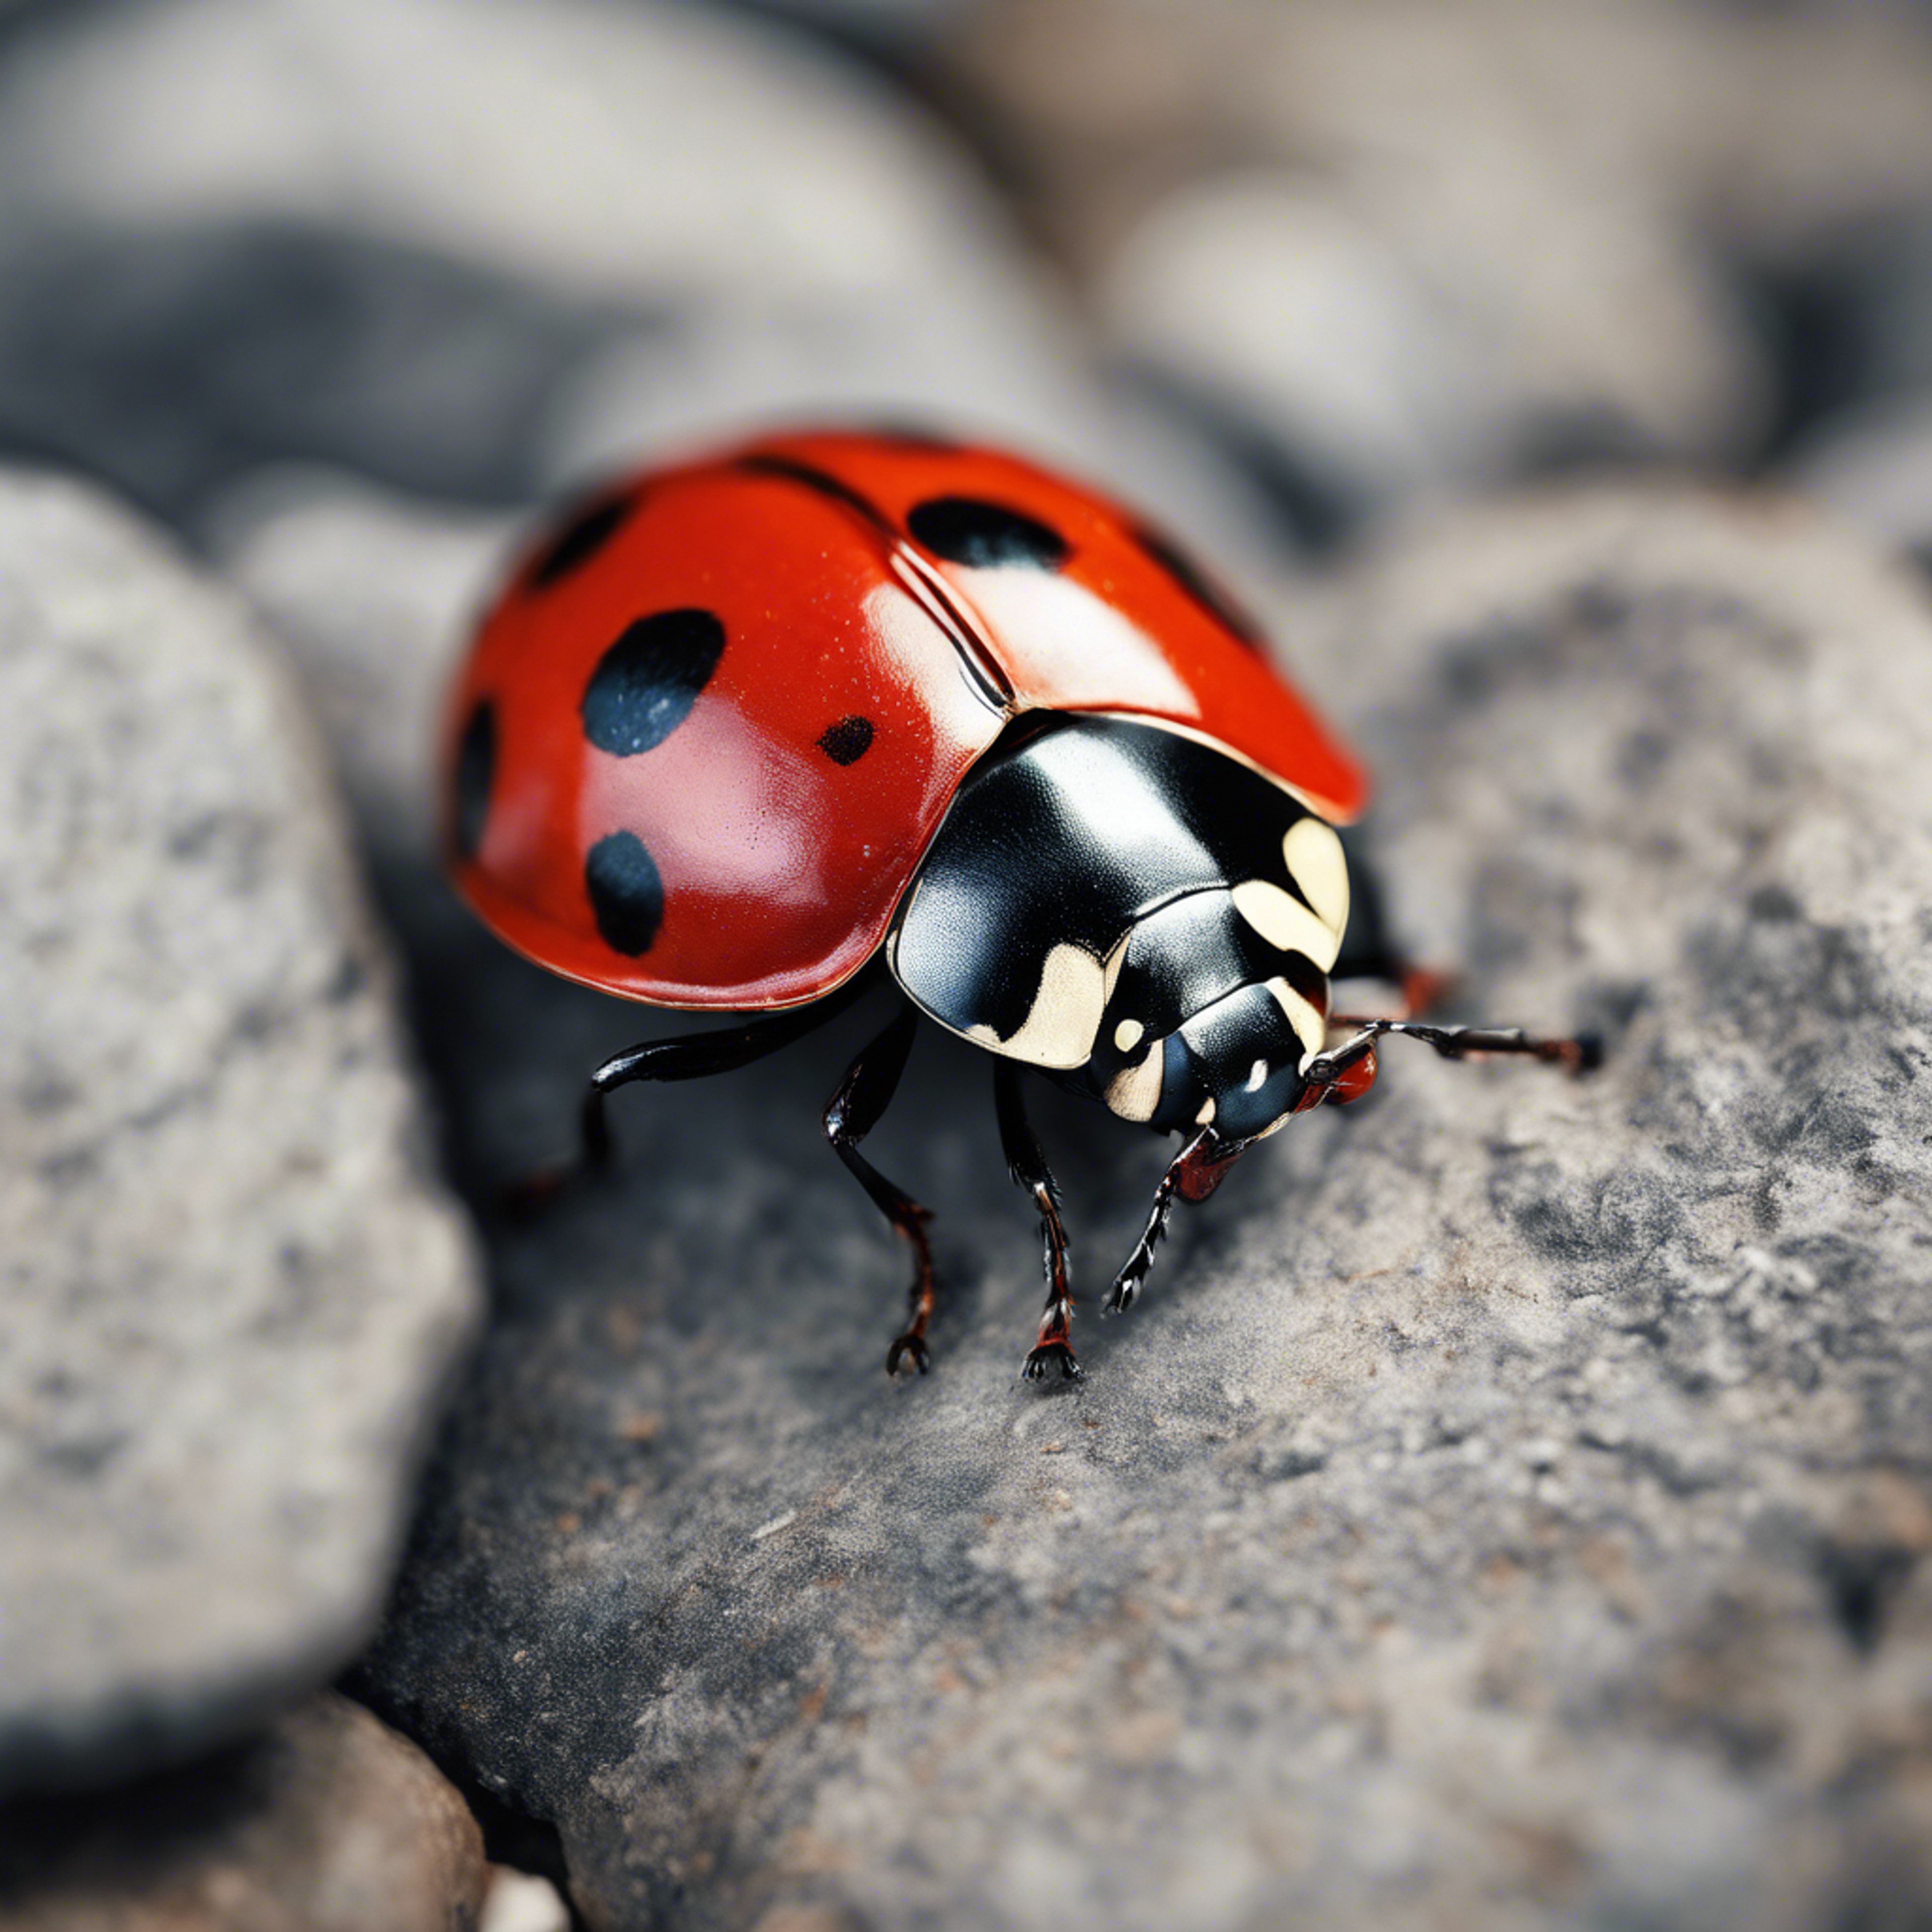 A fearless ladybug with bright red wings crawling over a dull, grey stone. 墙纸[cb02e673ce6f479eab40]